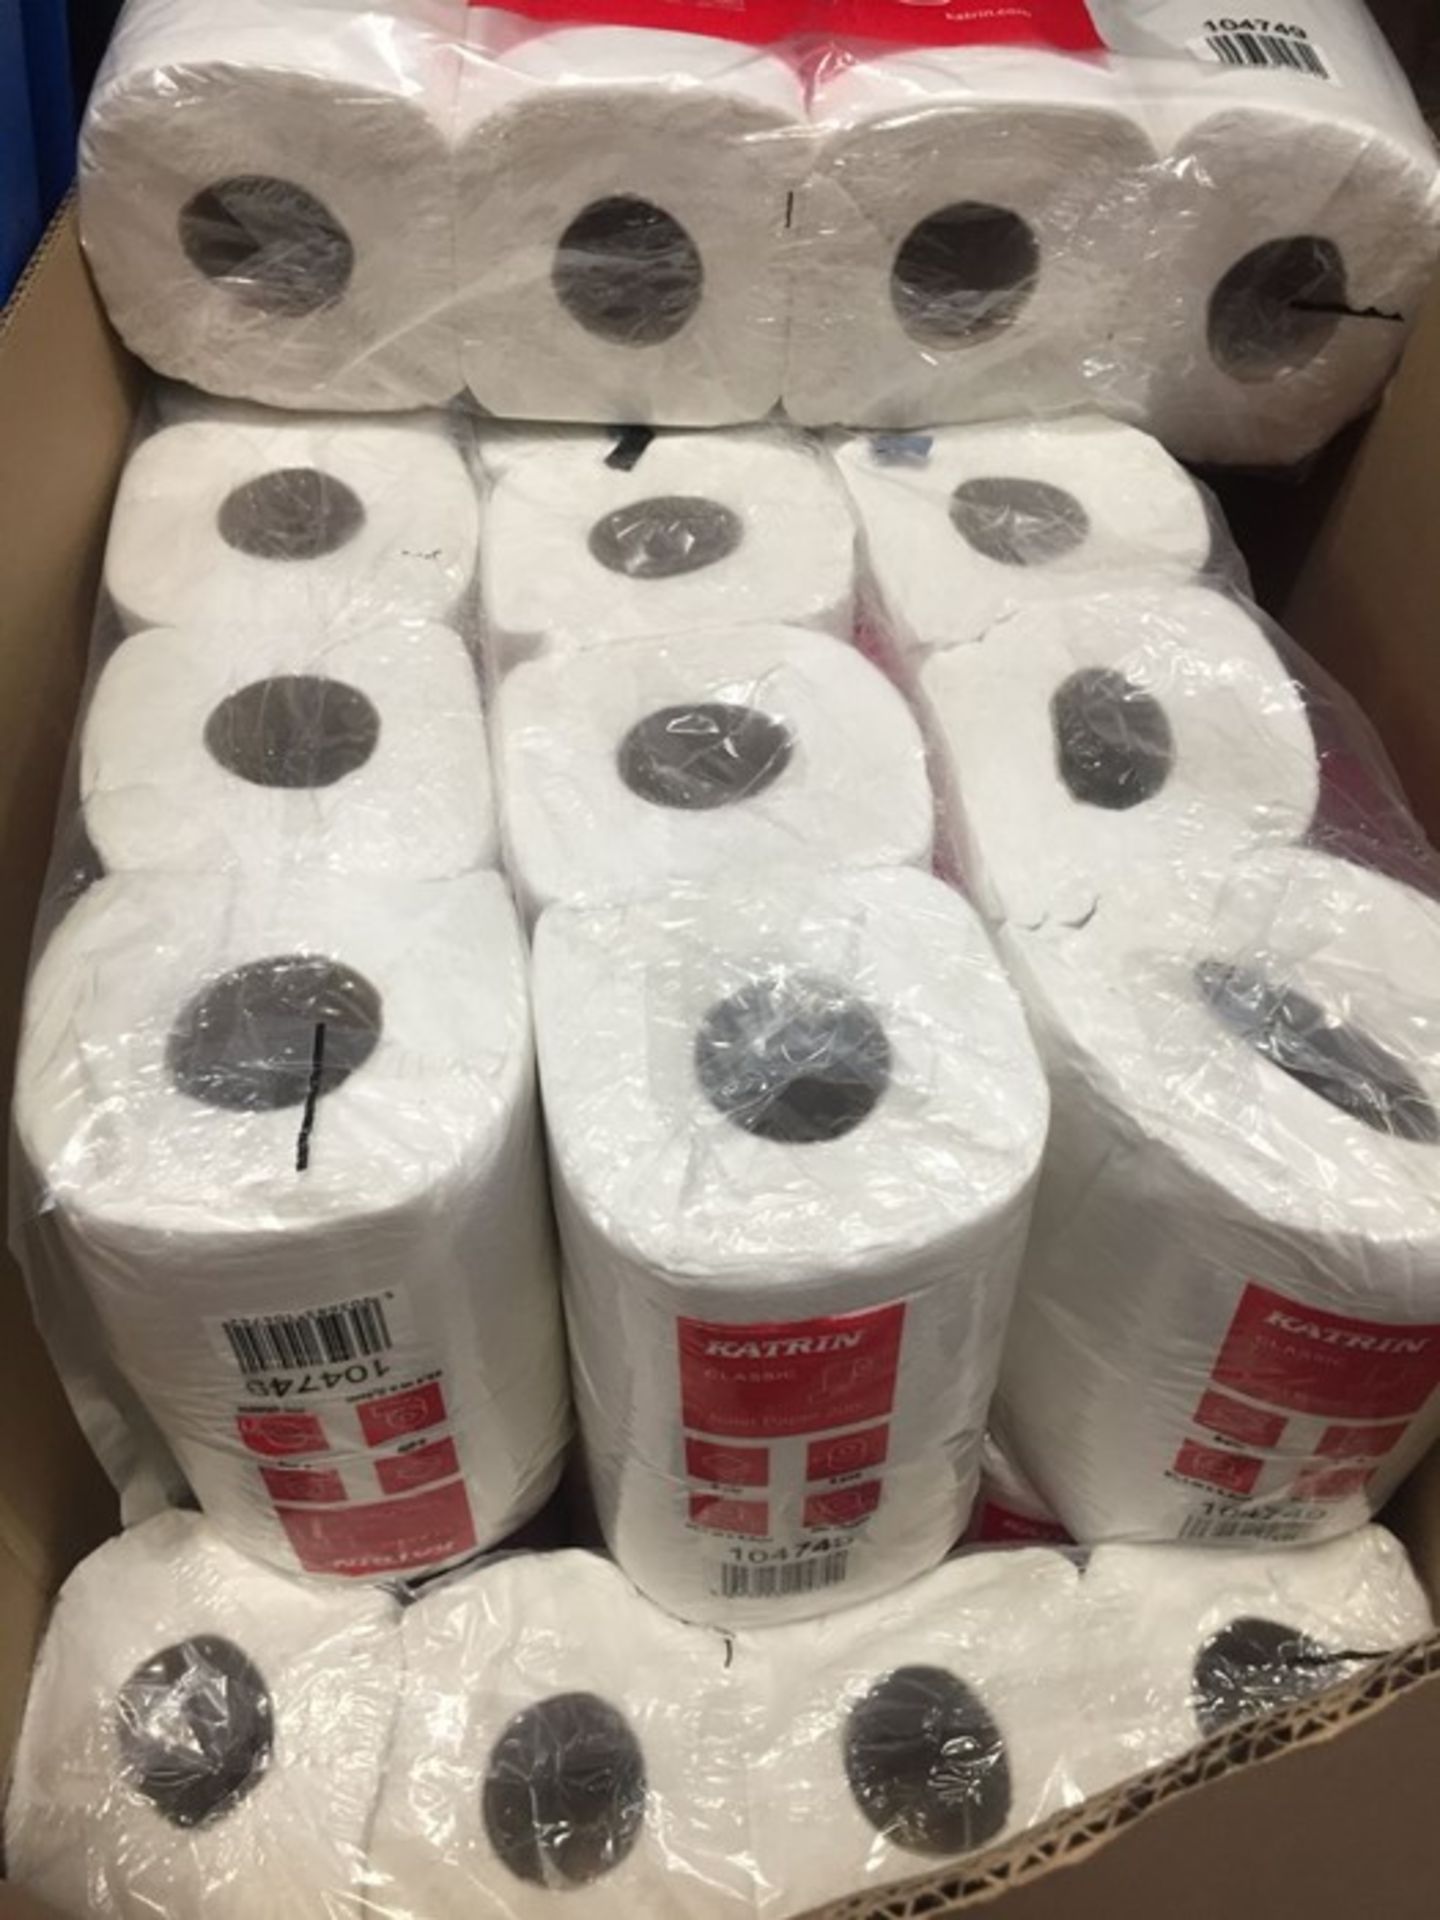 1 LOT TO CONTAIN A BOX OF 8 PACKS OF KATRIN CLASSIC TOILET PAPER 200, EACH PACK CONTAINS 8 ROLLS, 64